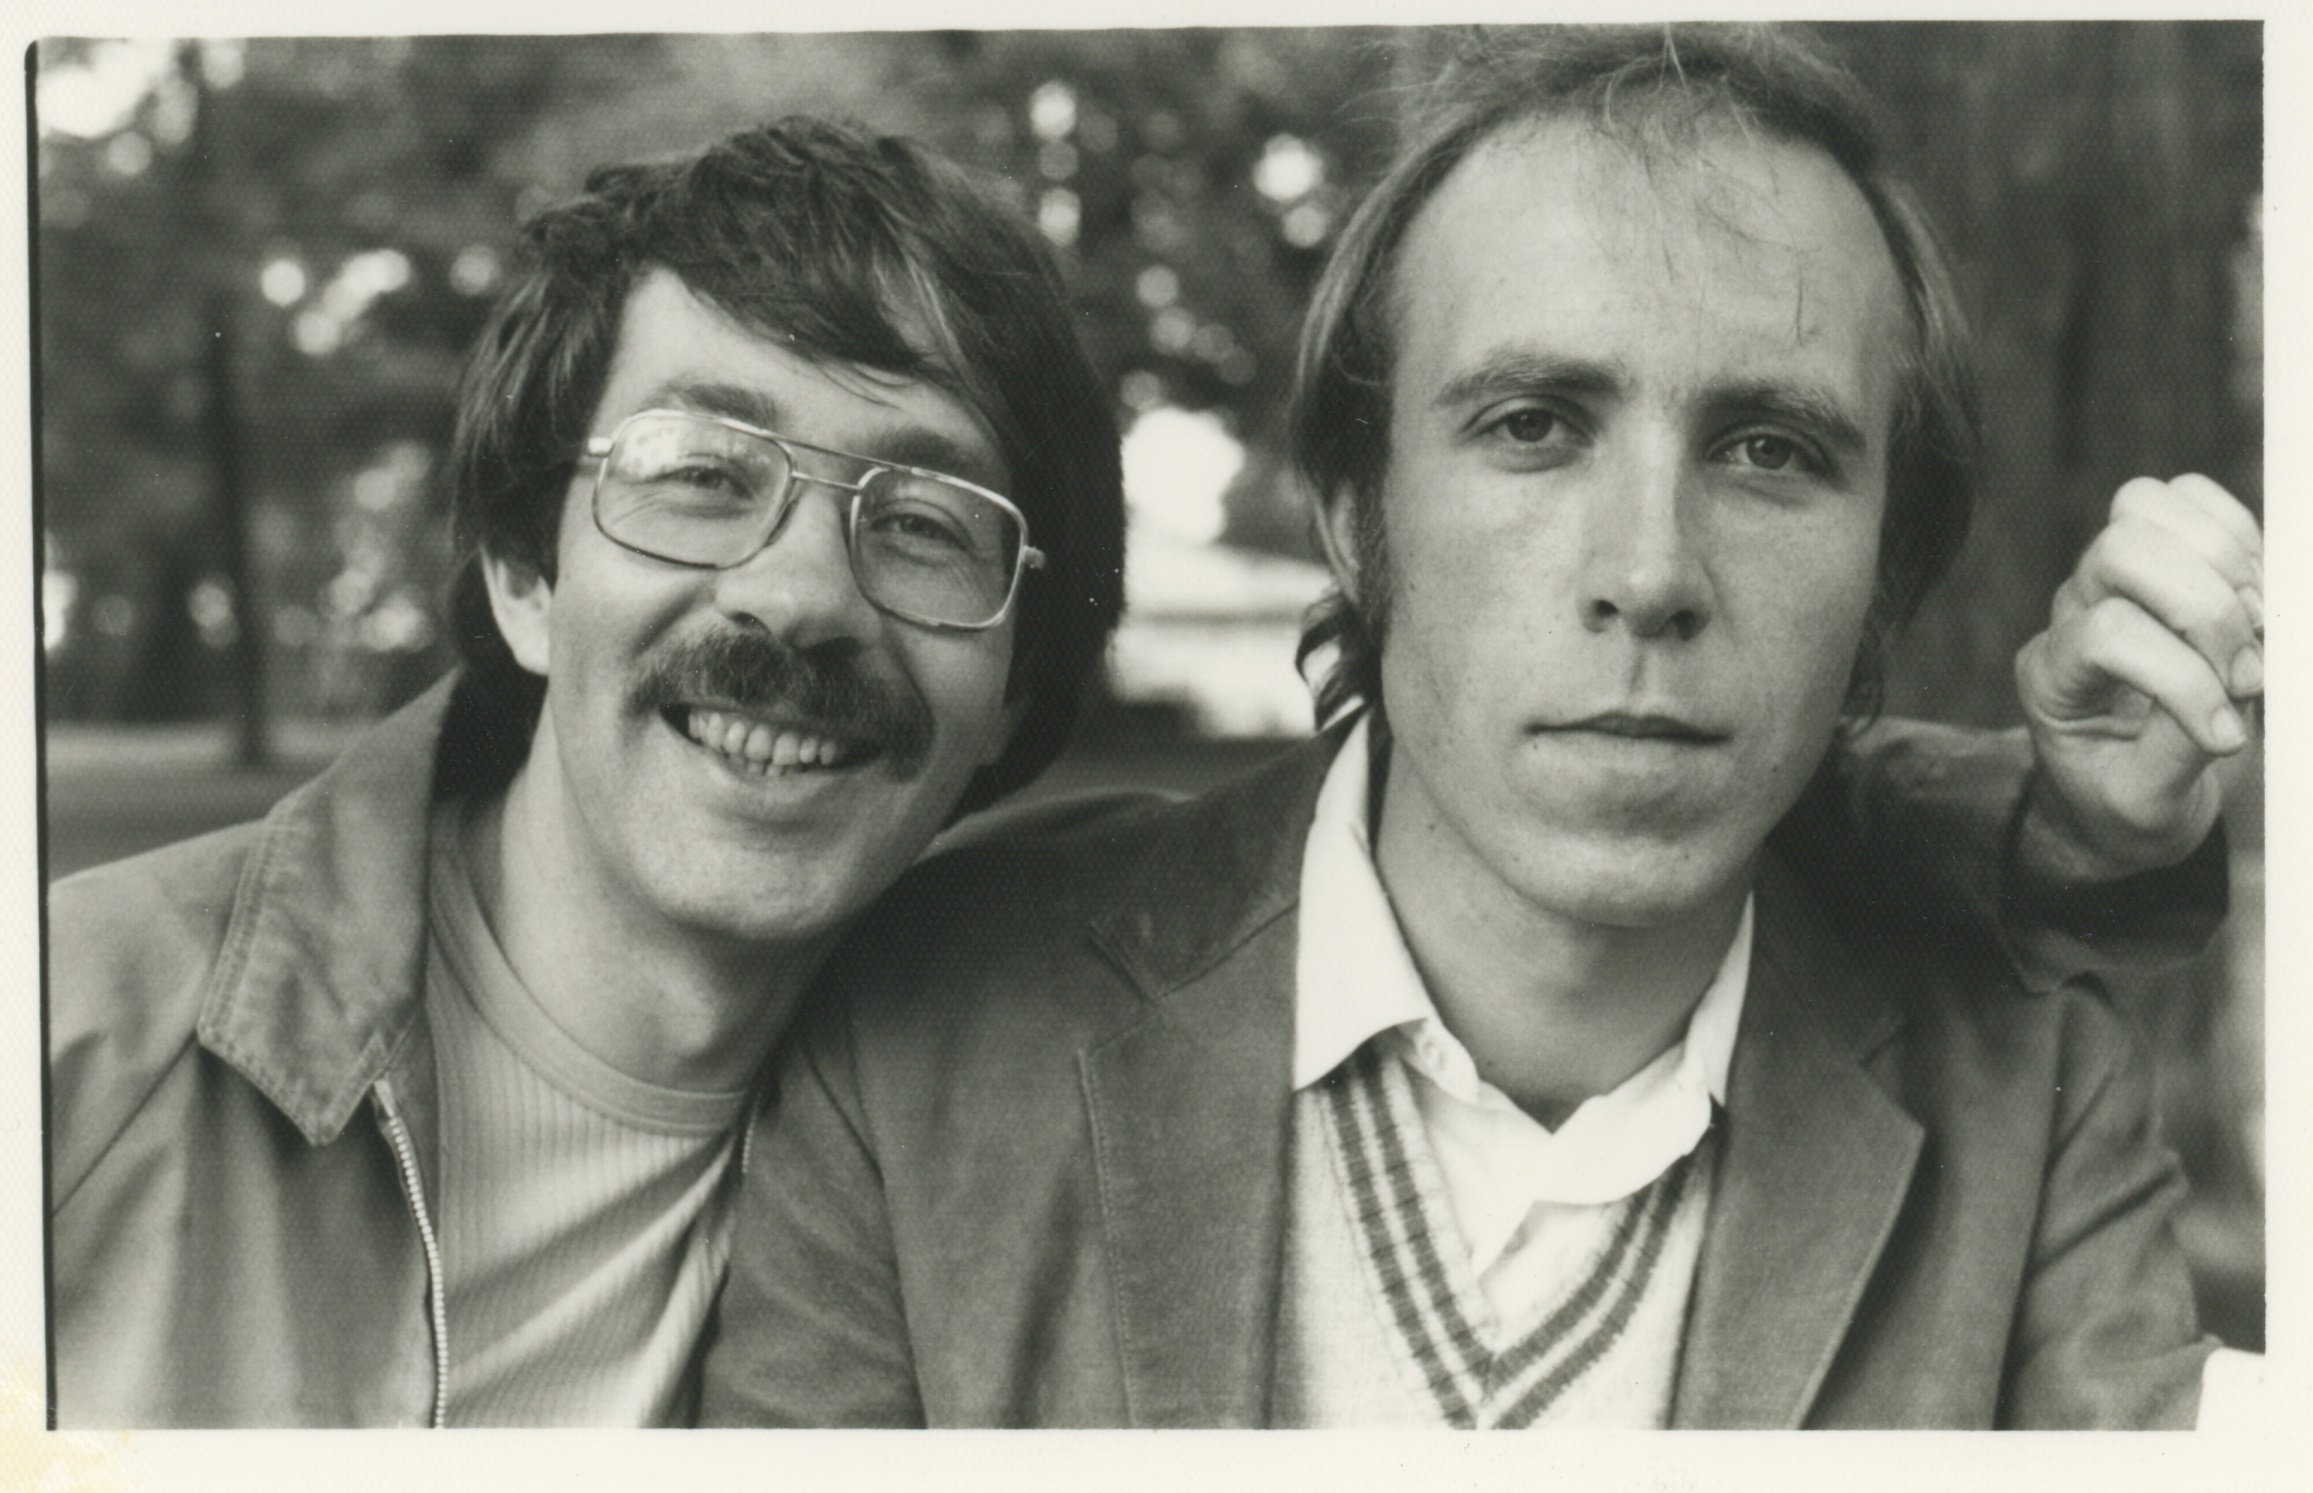 Gerald Hannon and the late Robert Trow, who were lovers for a time.